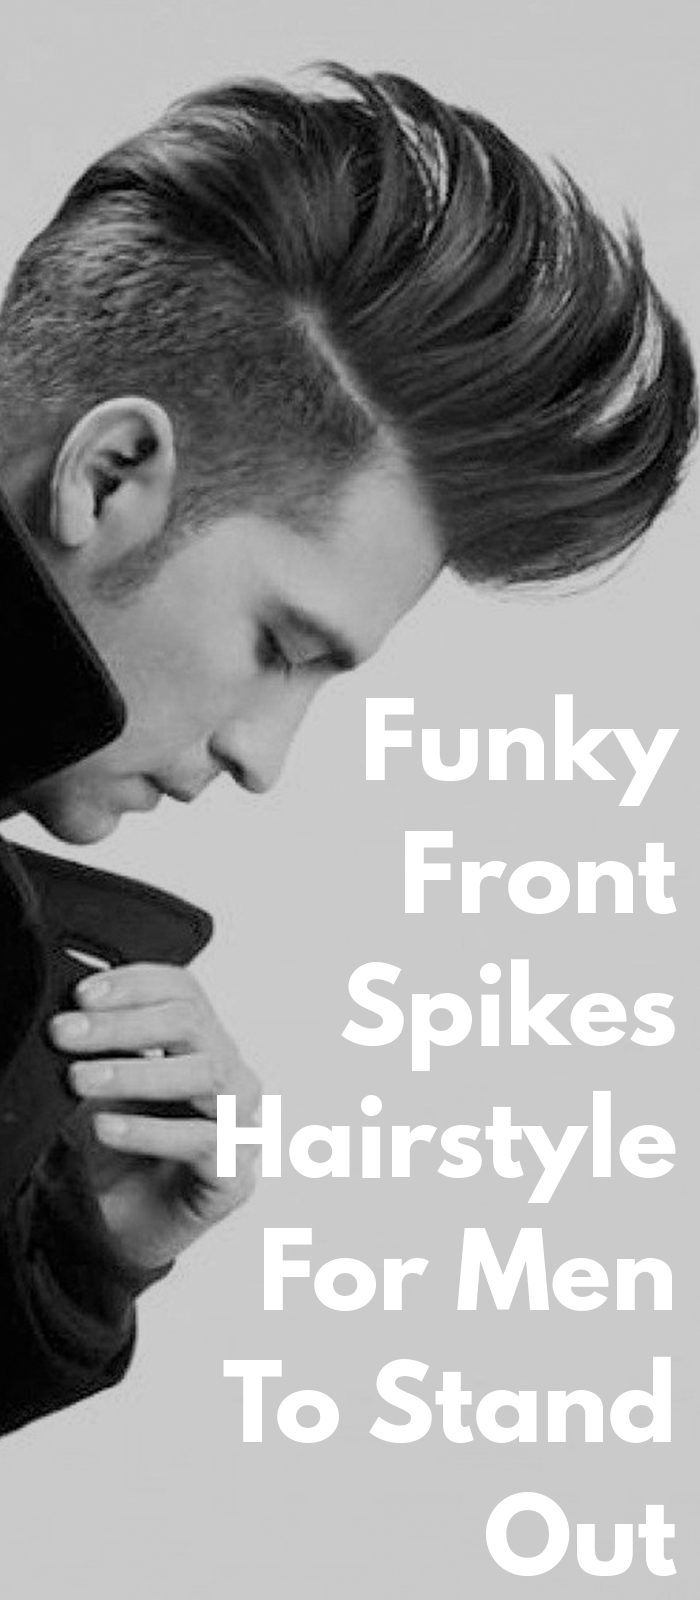 Funky Front Spikes Hairstyles For Men To Stand Out ⋆ Best Fashion Blog For  Men 